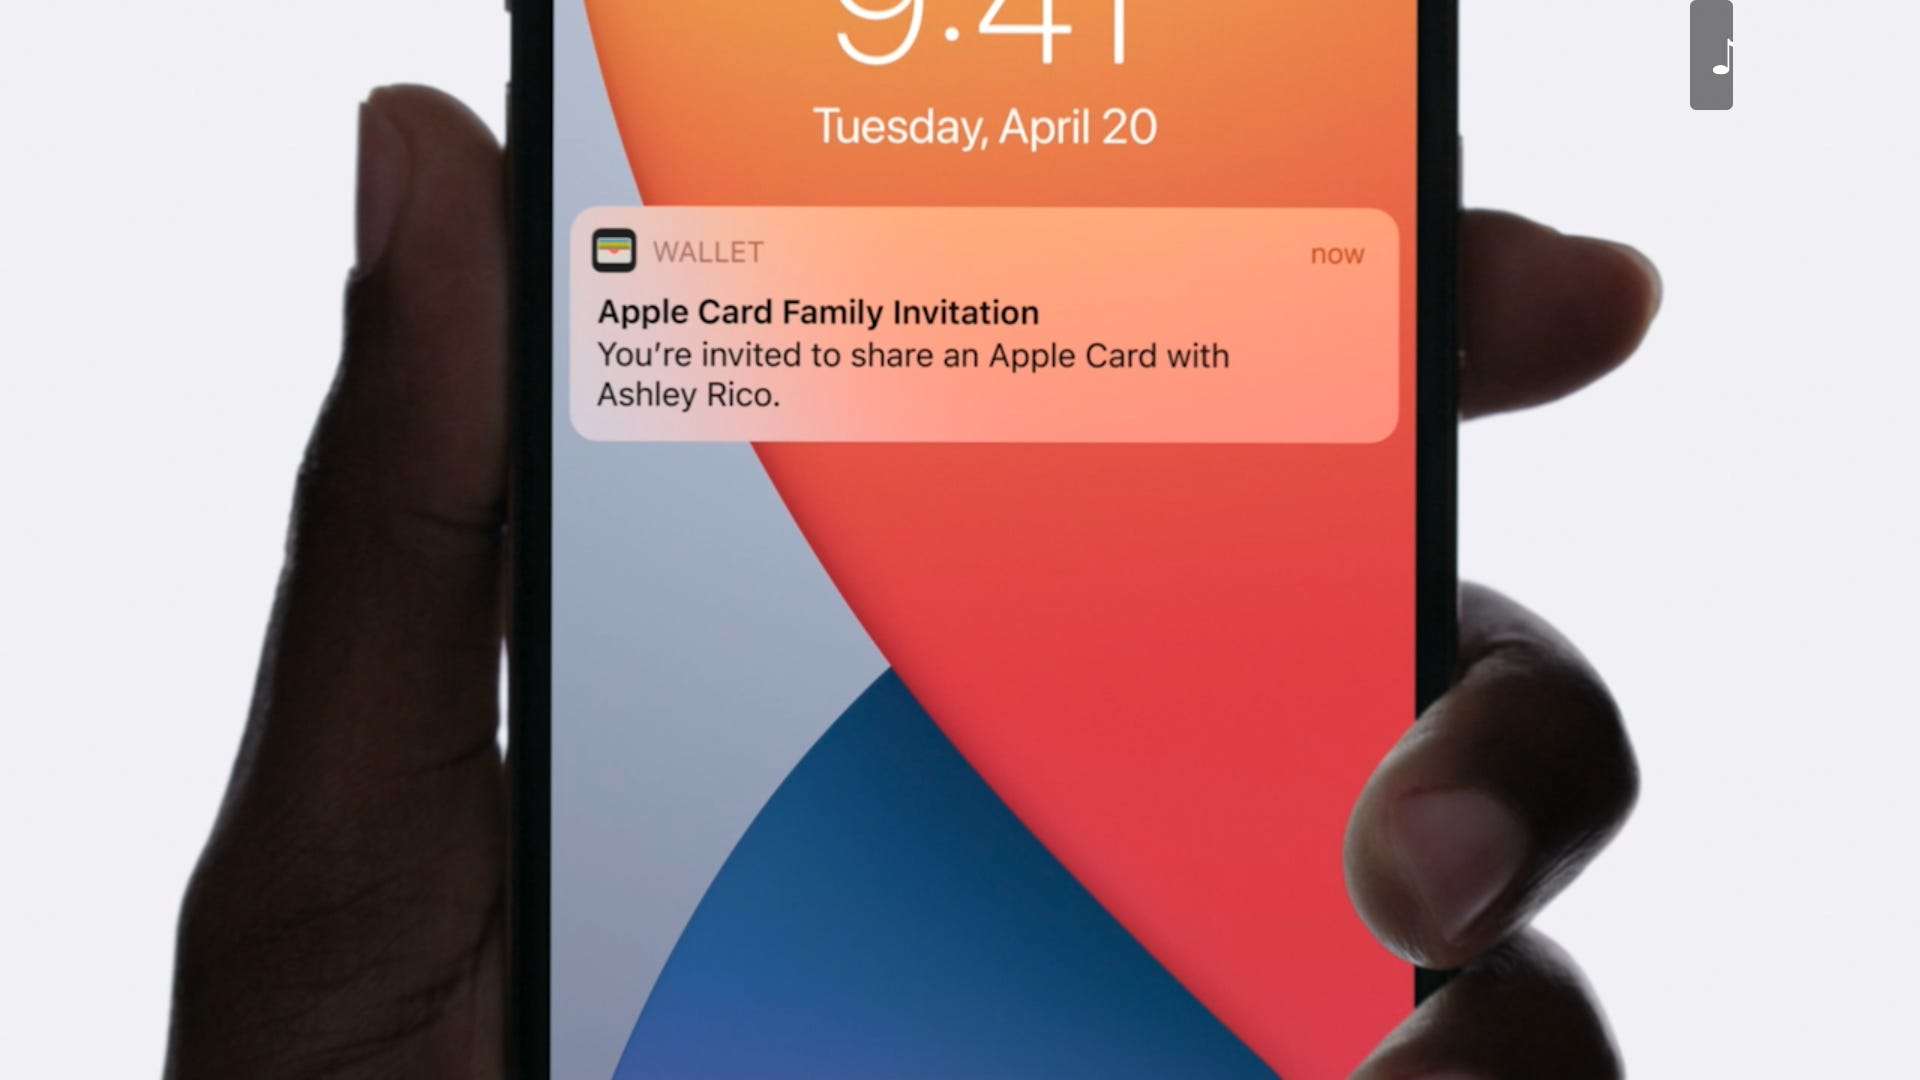 How to Share an Apple Card With Your Family